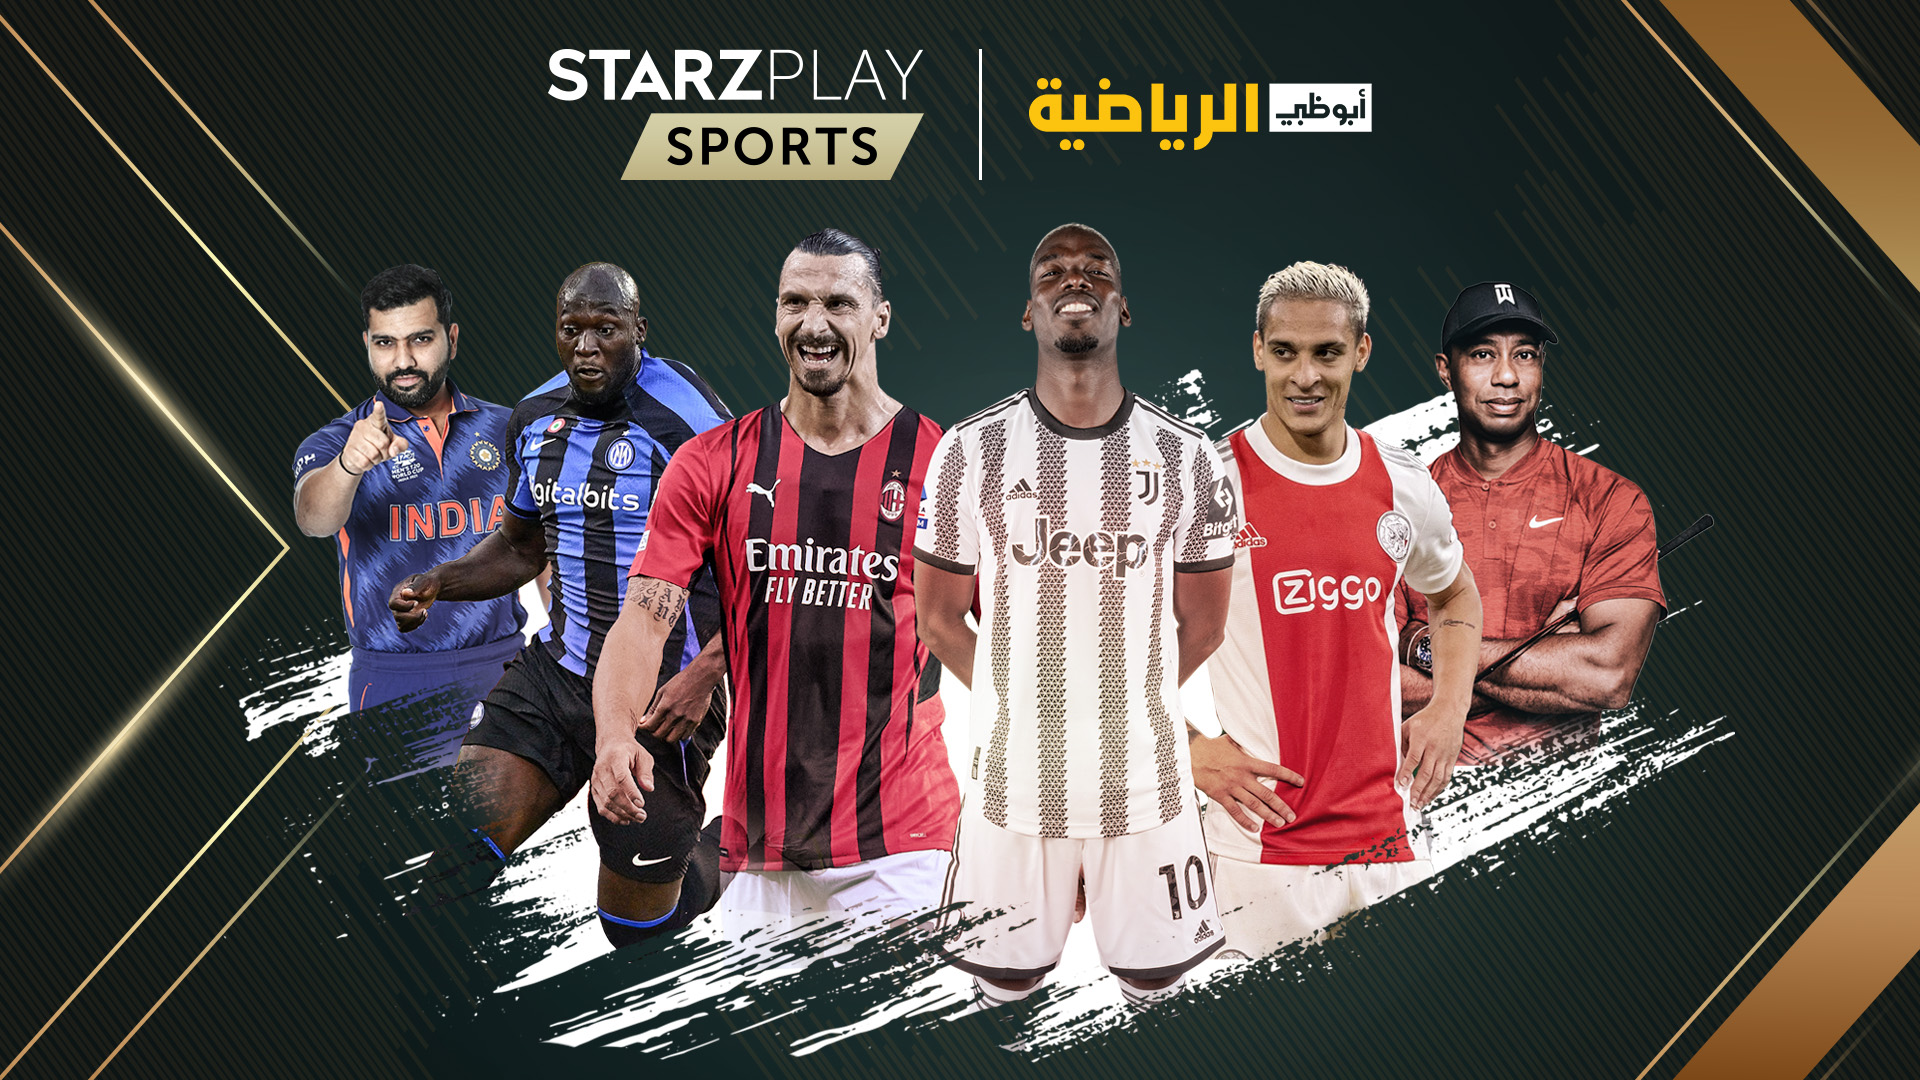 Starzplay launches dedicated sports streaming product for MENA market